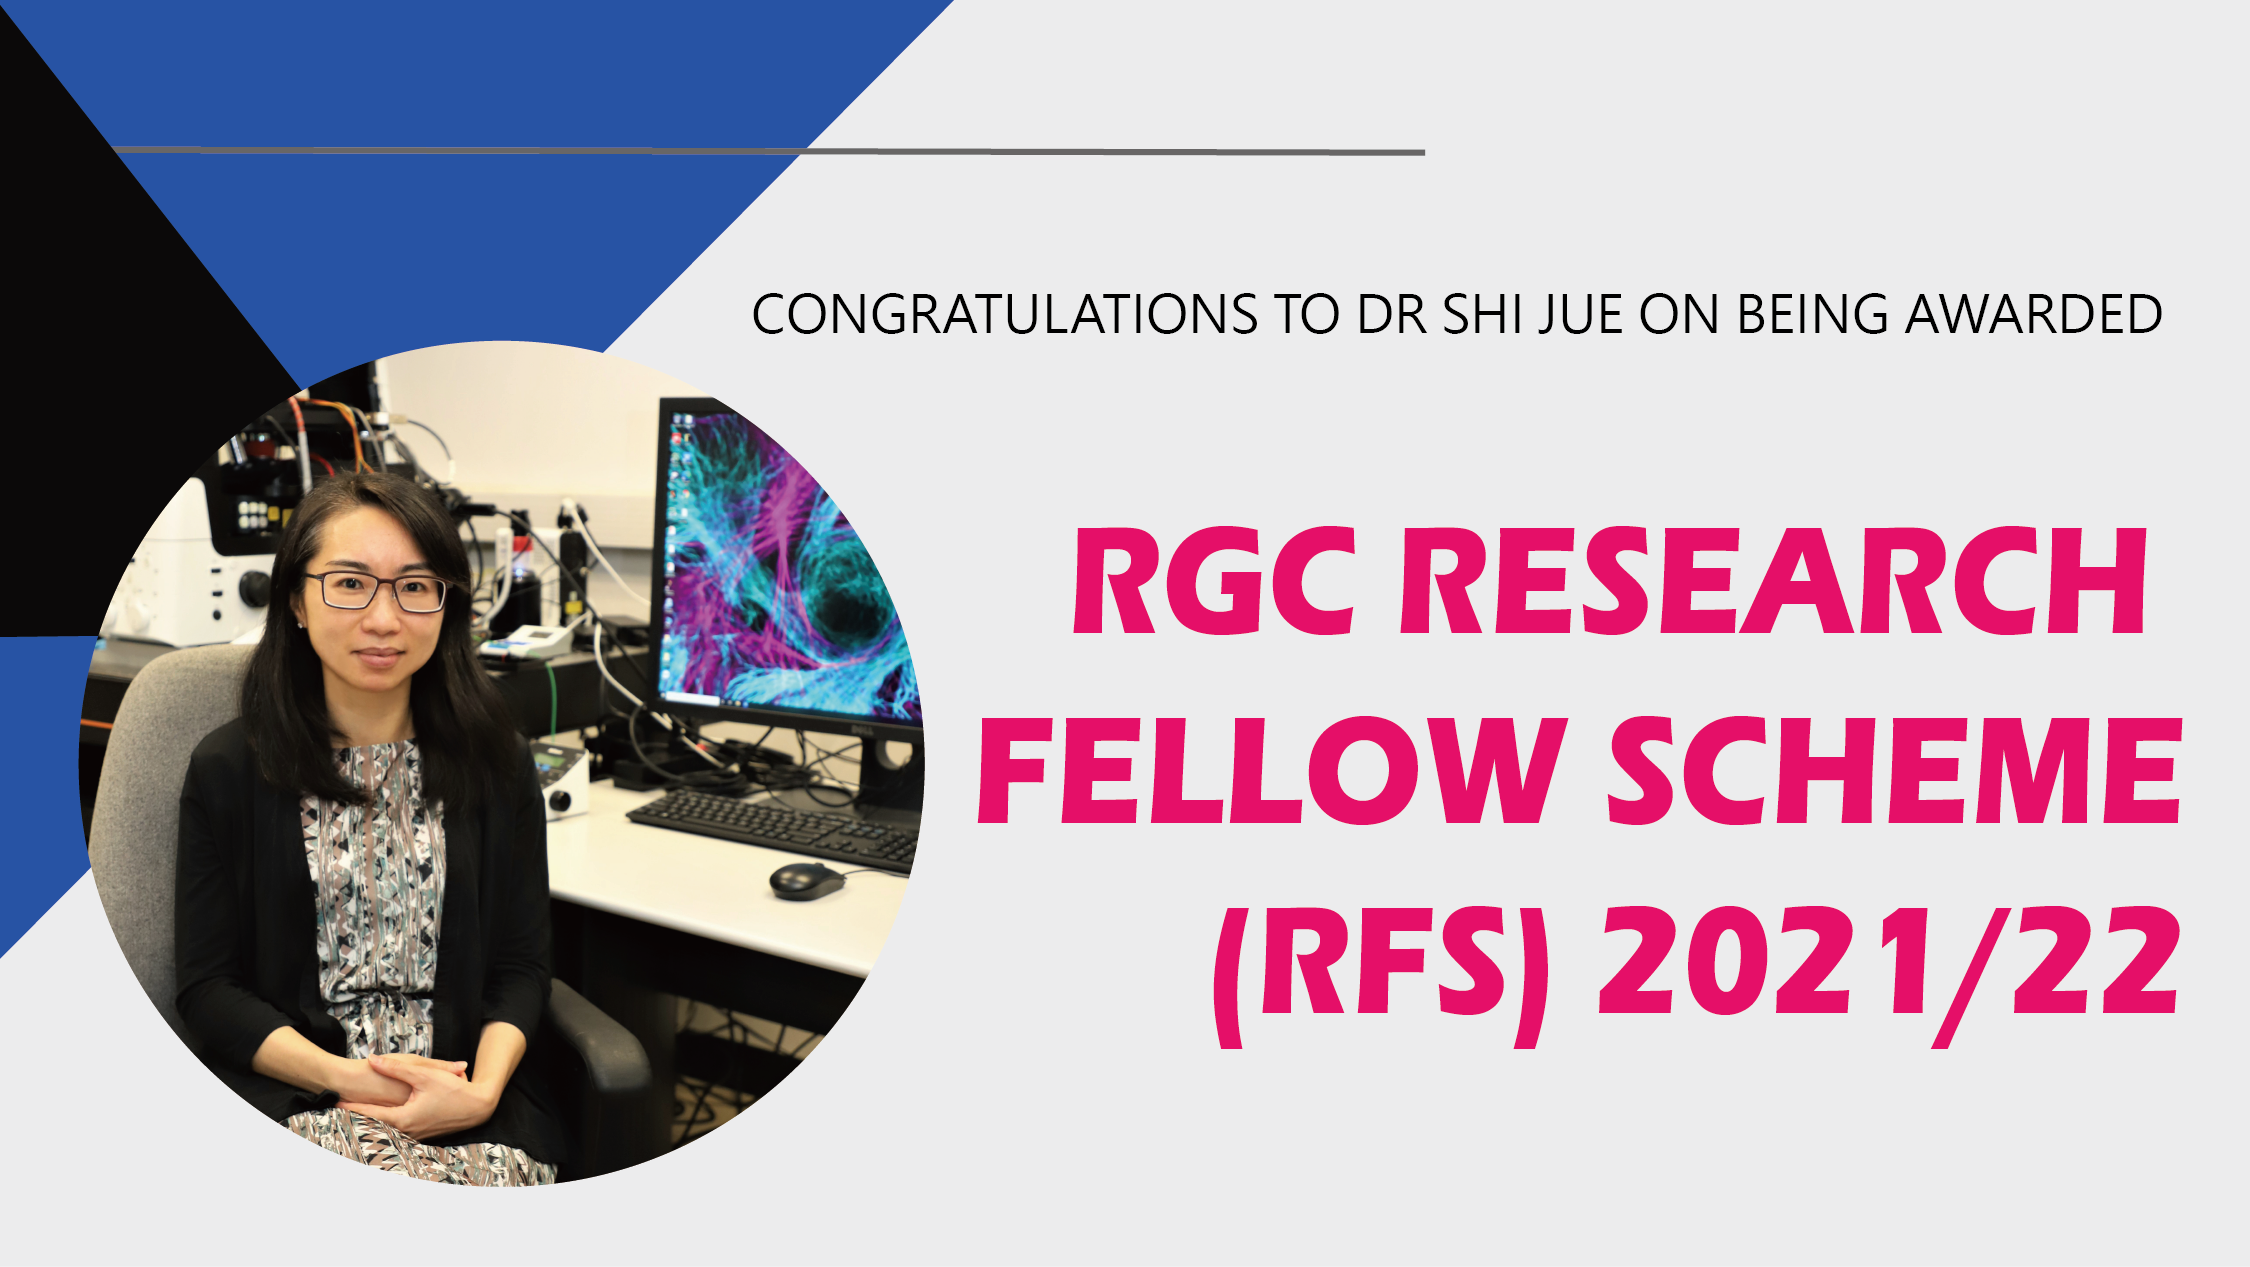 Dr Shi, Jue Jade awarded the honour of RGC Research Fellow 2021/22